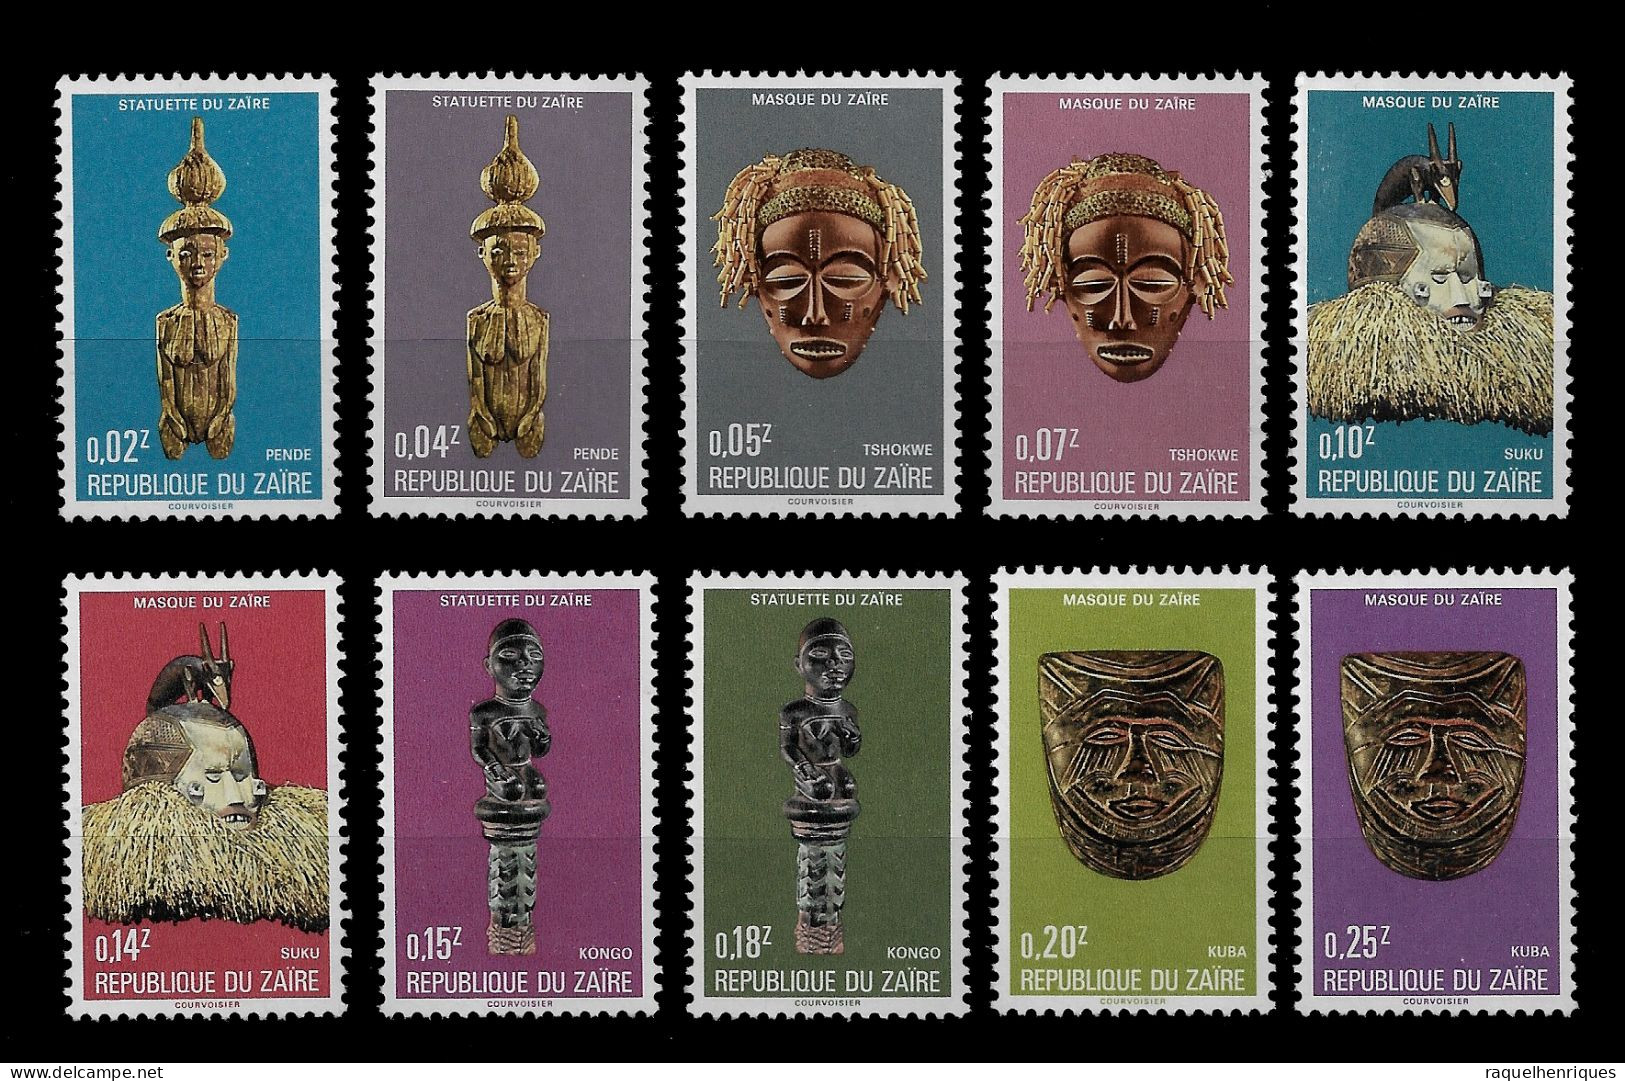 CONGO ZAIRE STAMP - 1977 Masks And Statuettes SET MNH (NP#01) - Unused Stamps